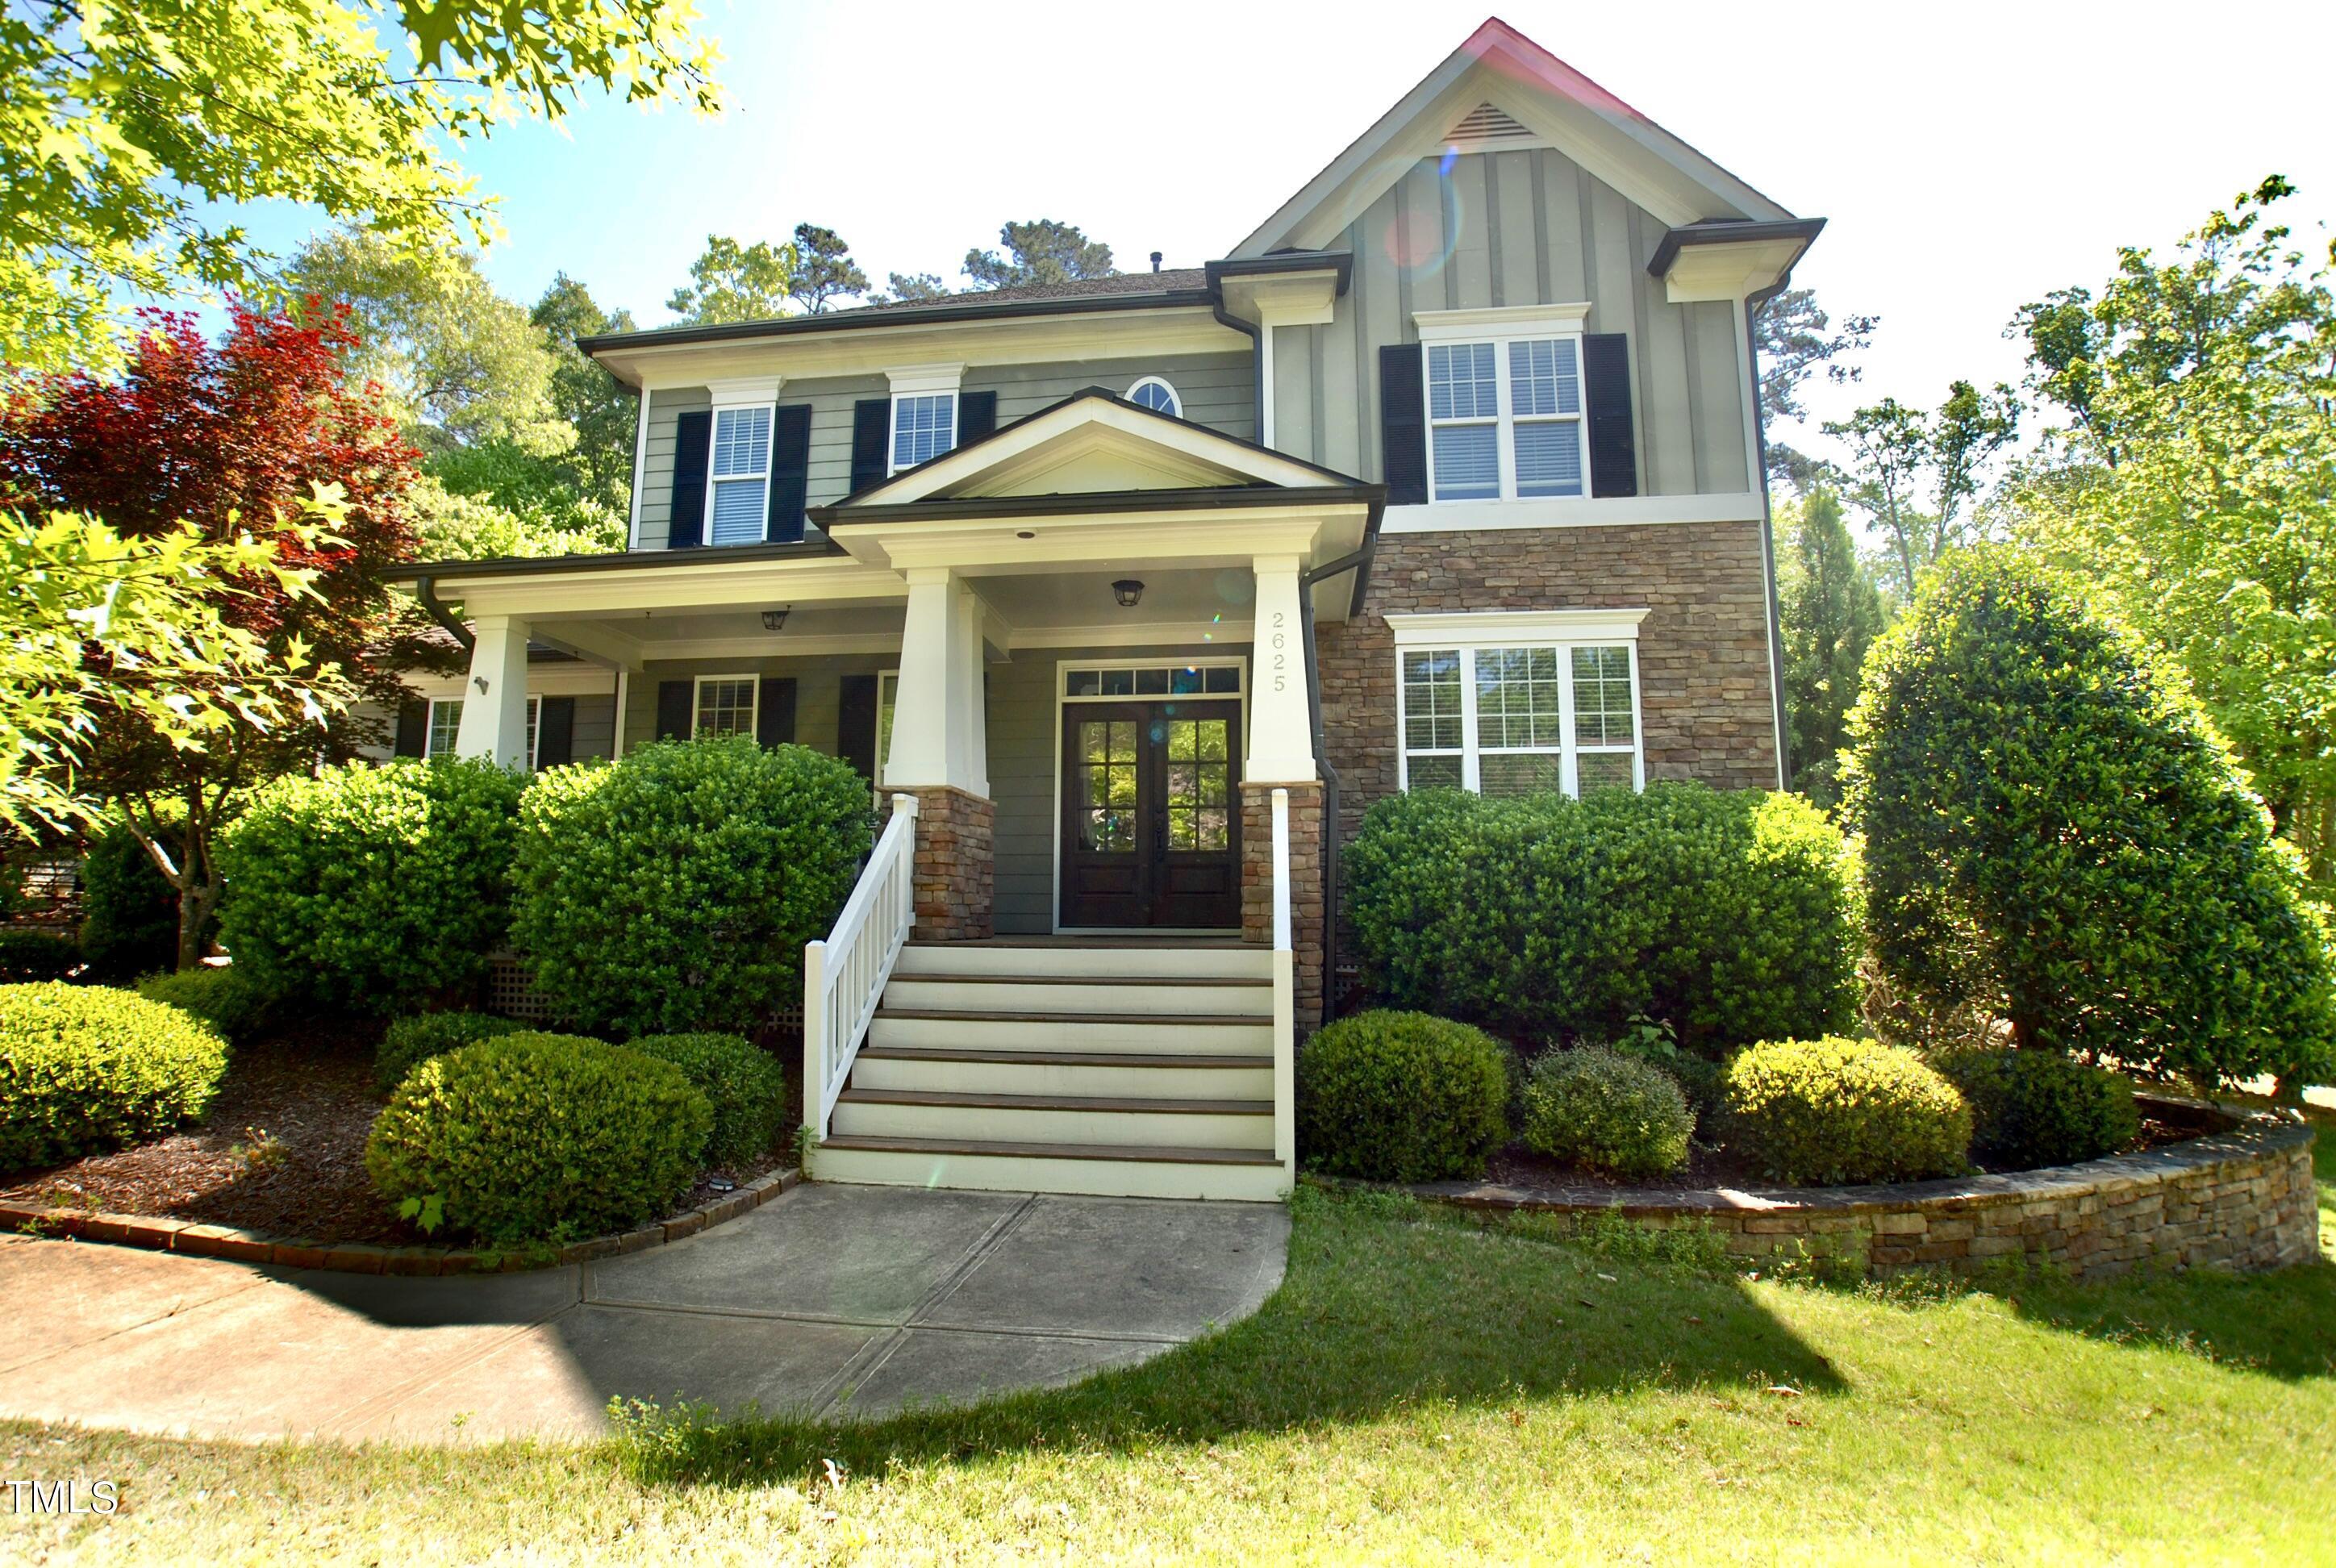 Photo one of 2625 Silver Bend Dr Apex NC 27539 | MLS 10009064